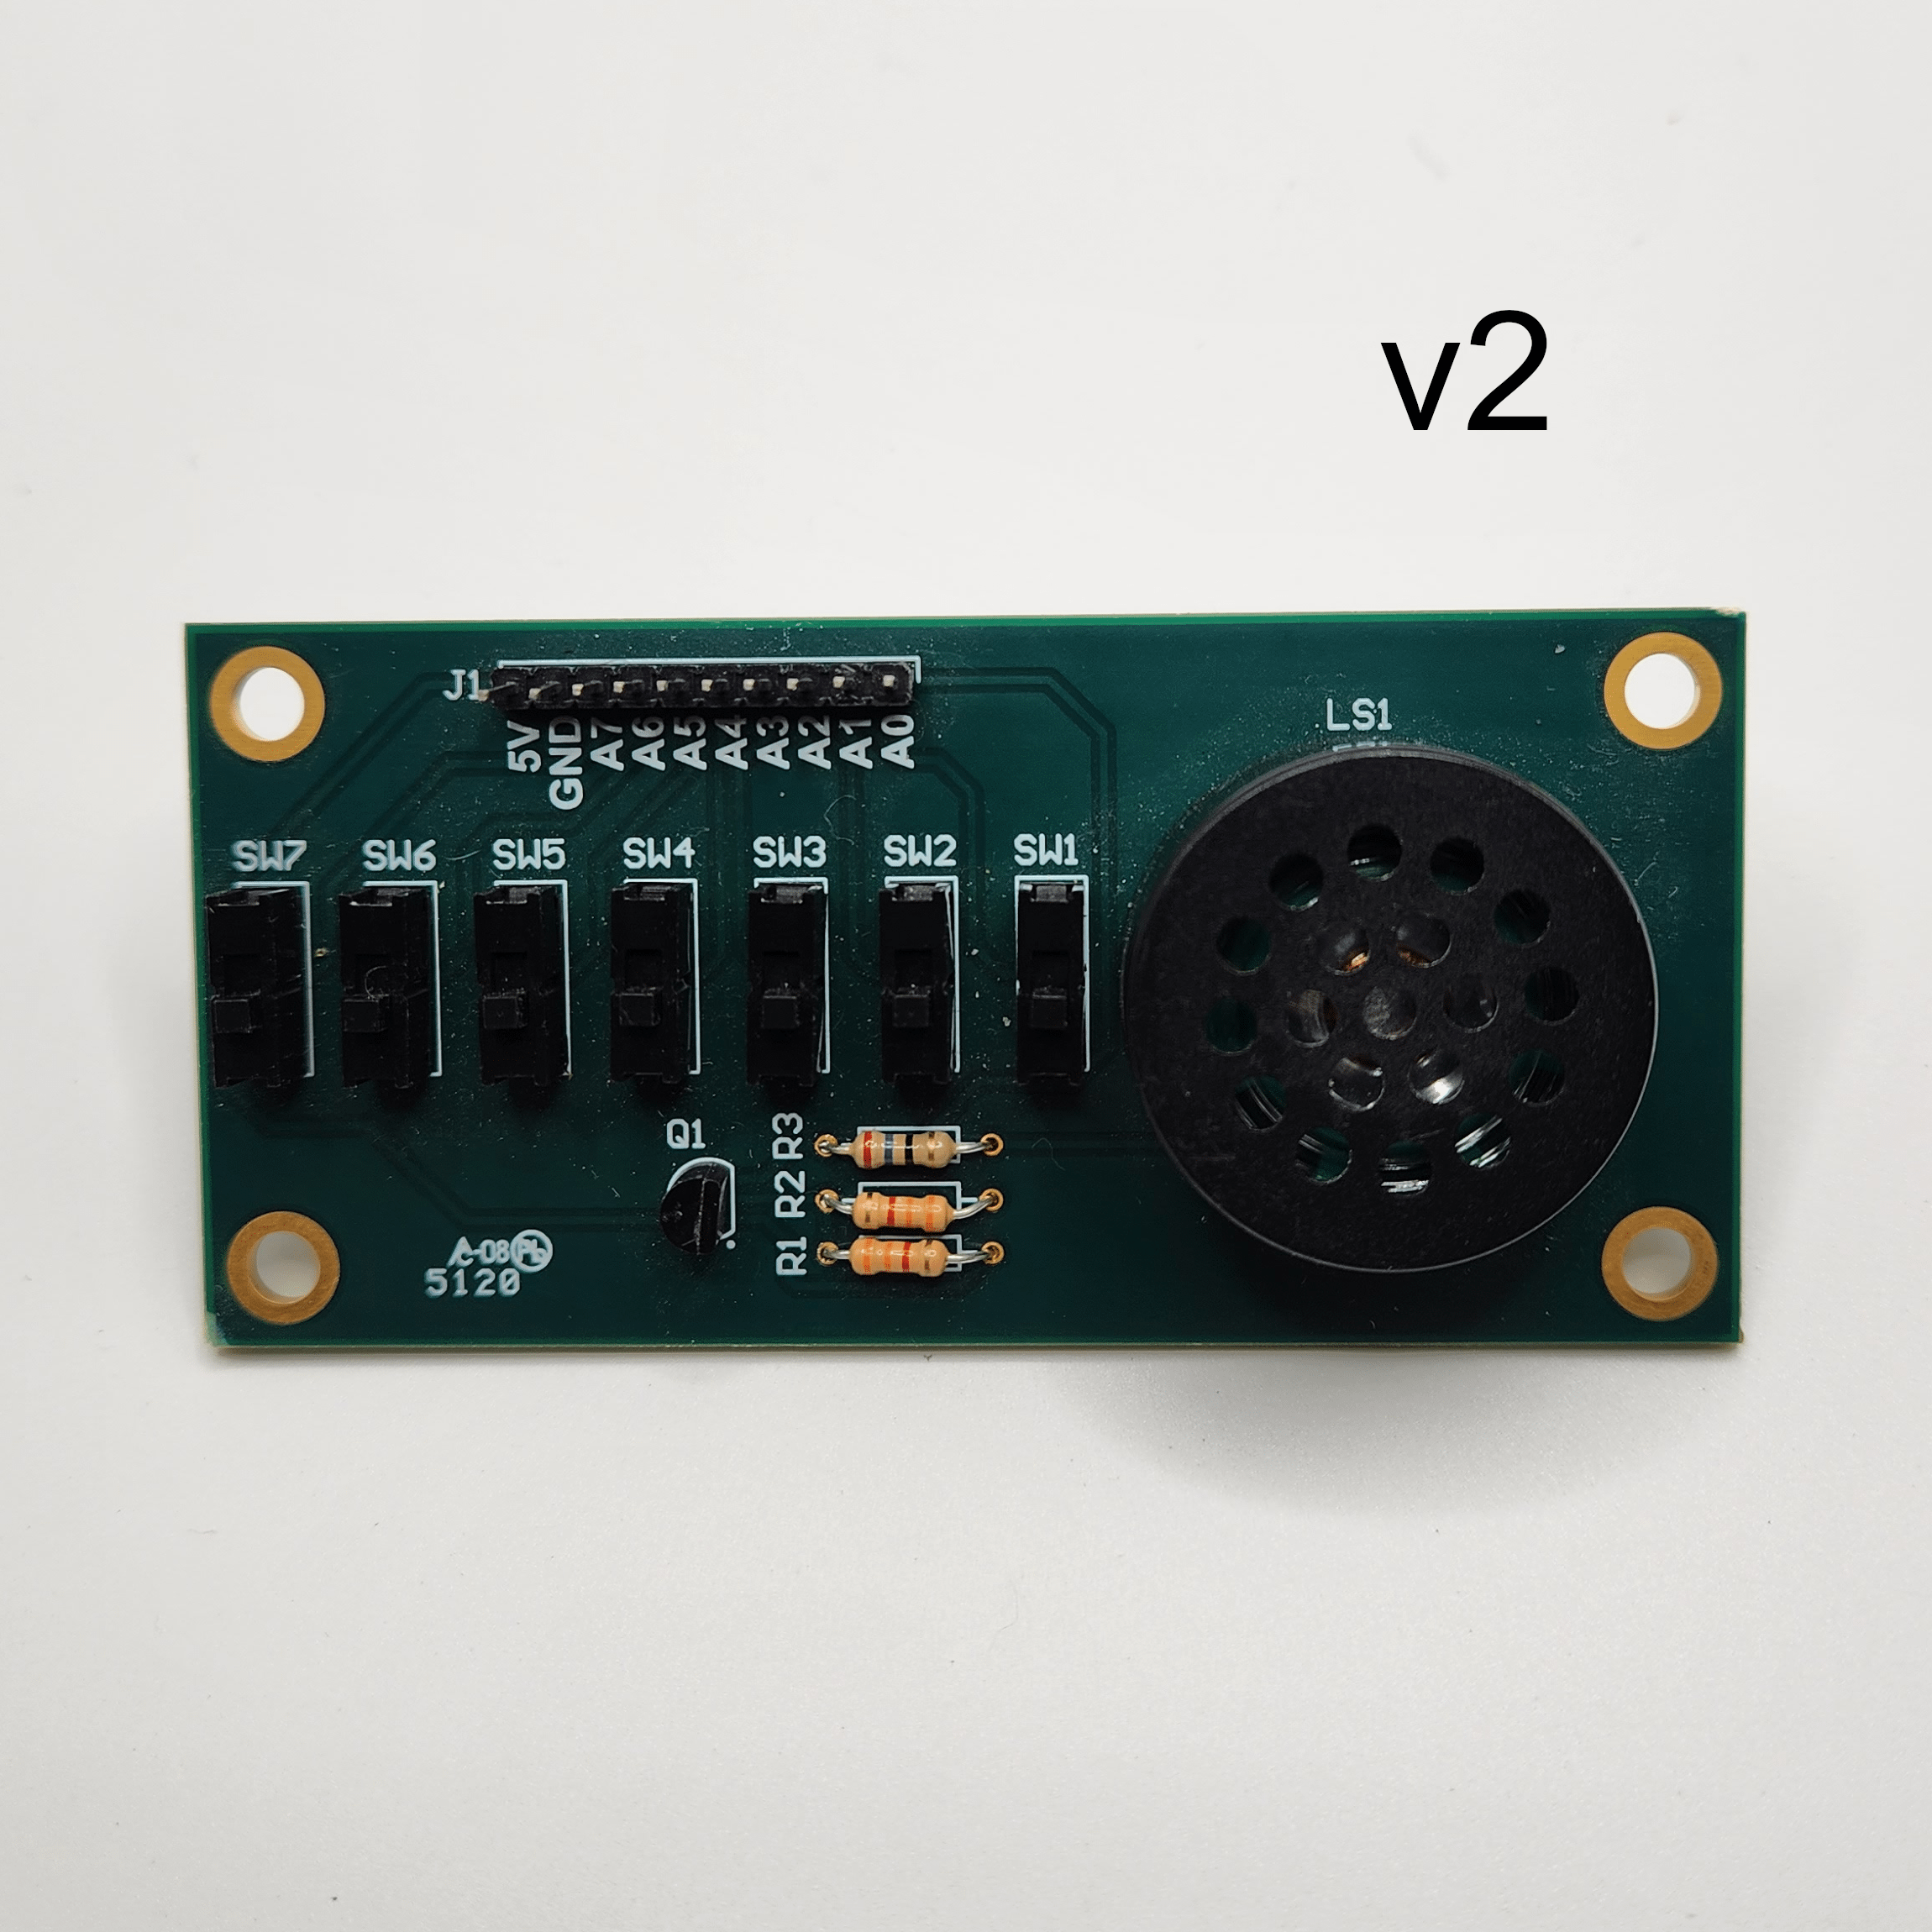 Complete populated Simple Switch and Speaker Demo Board v2 PCB with a text label indicating what version board it is